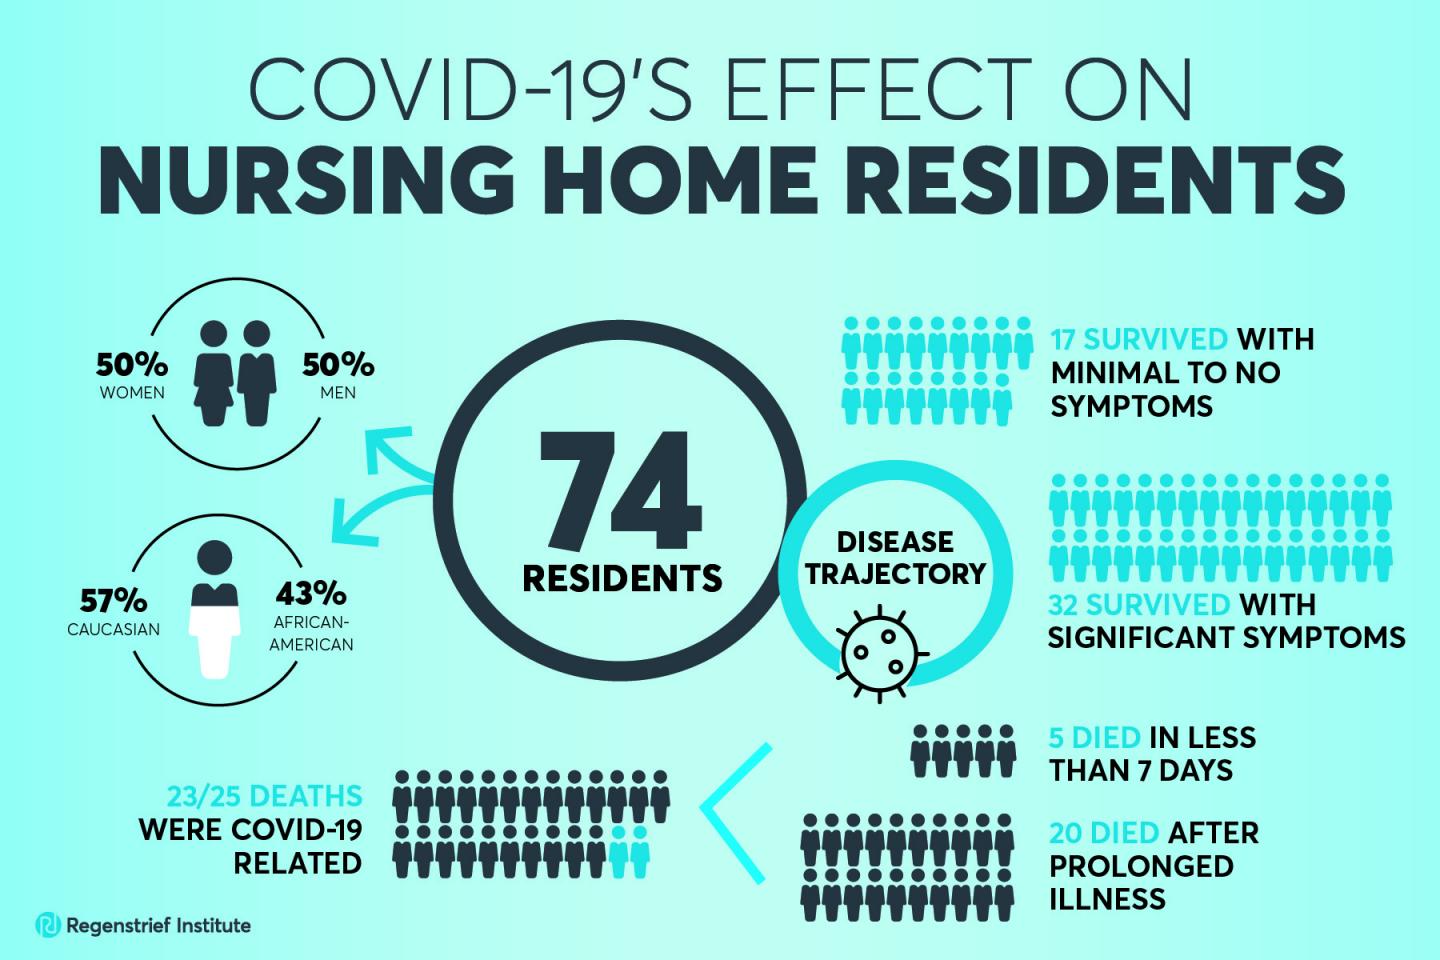 COVID-19's effect on nursing home residents